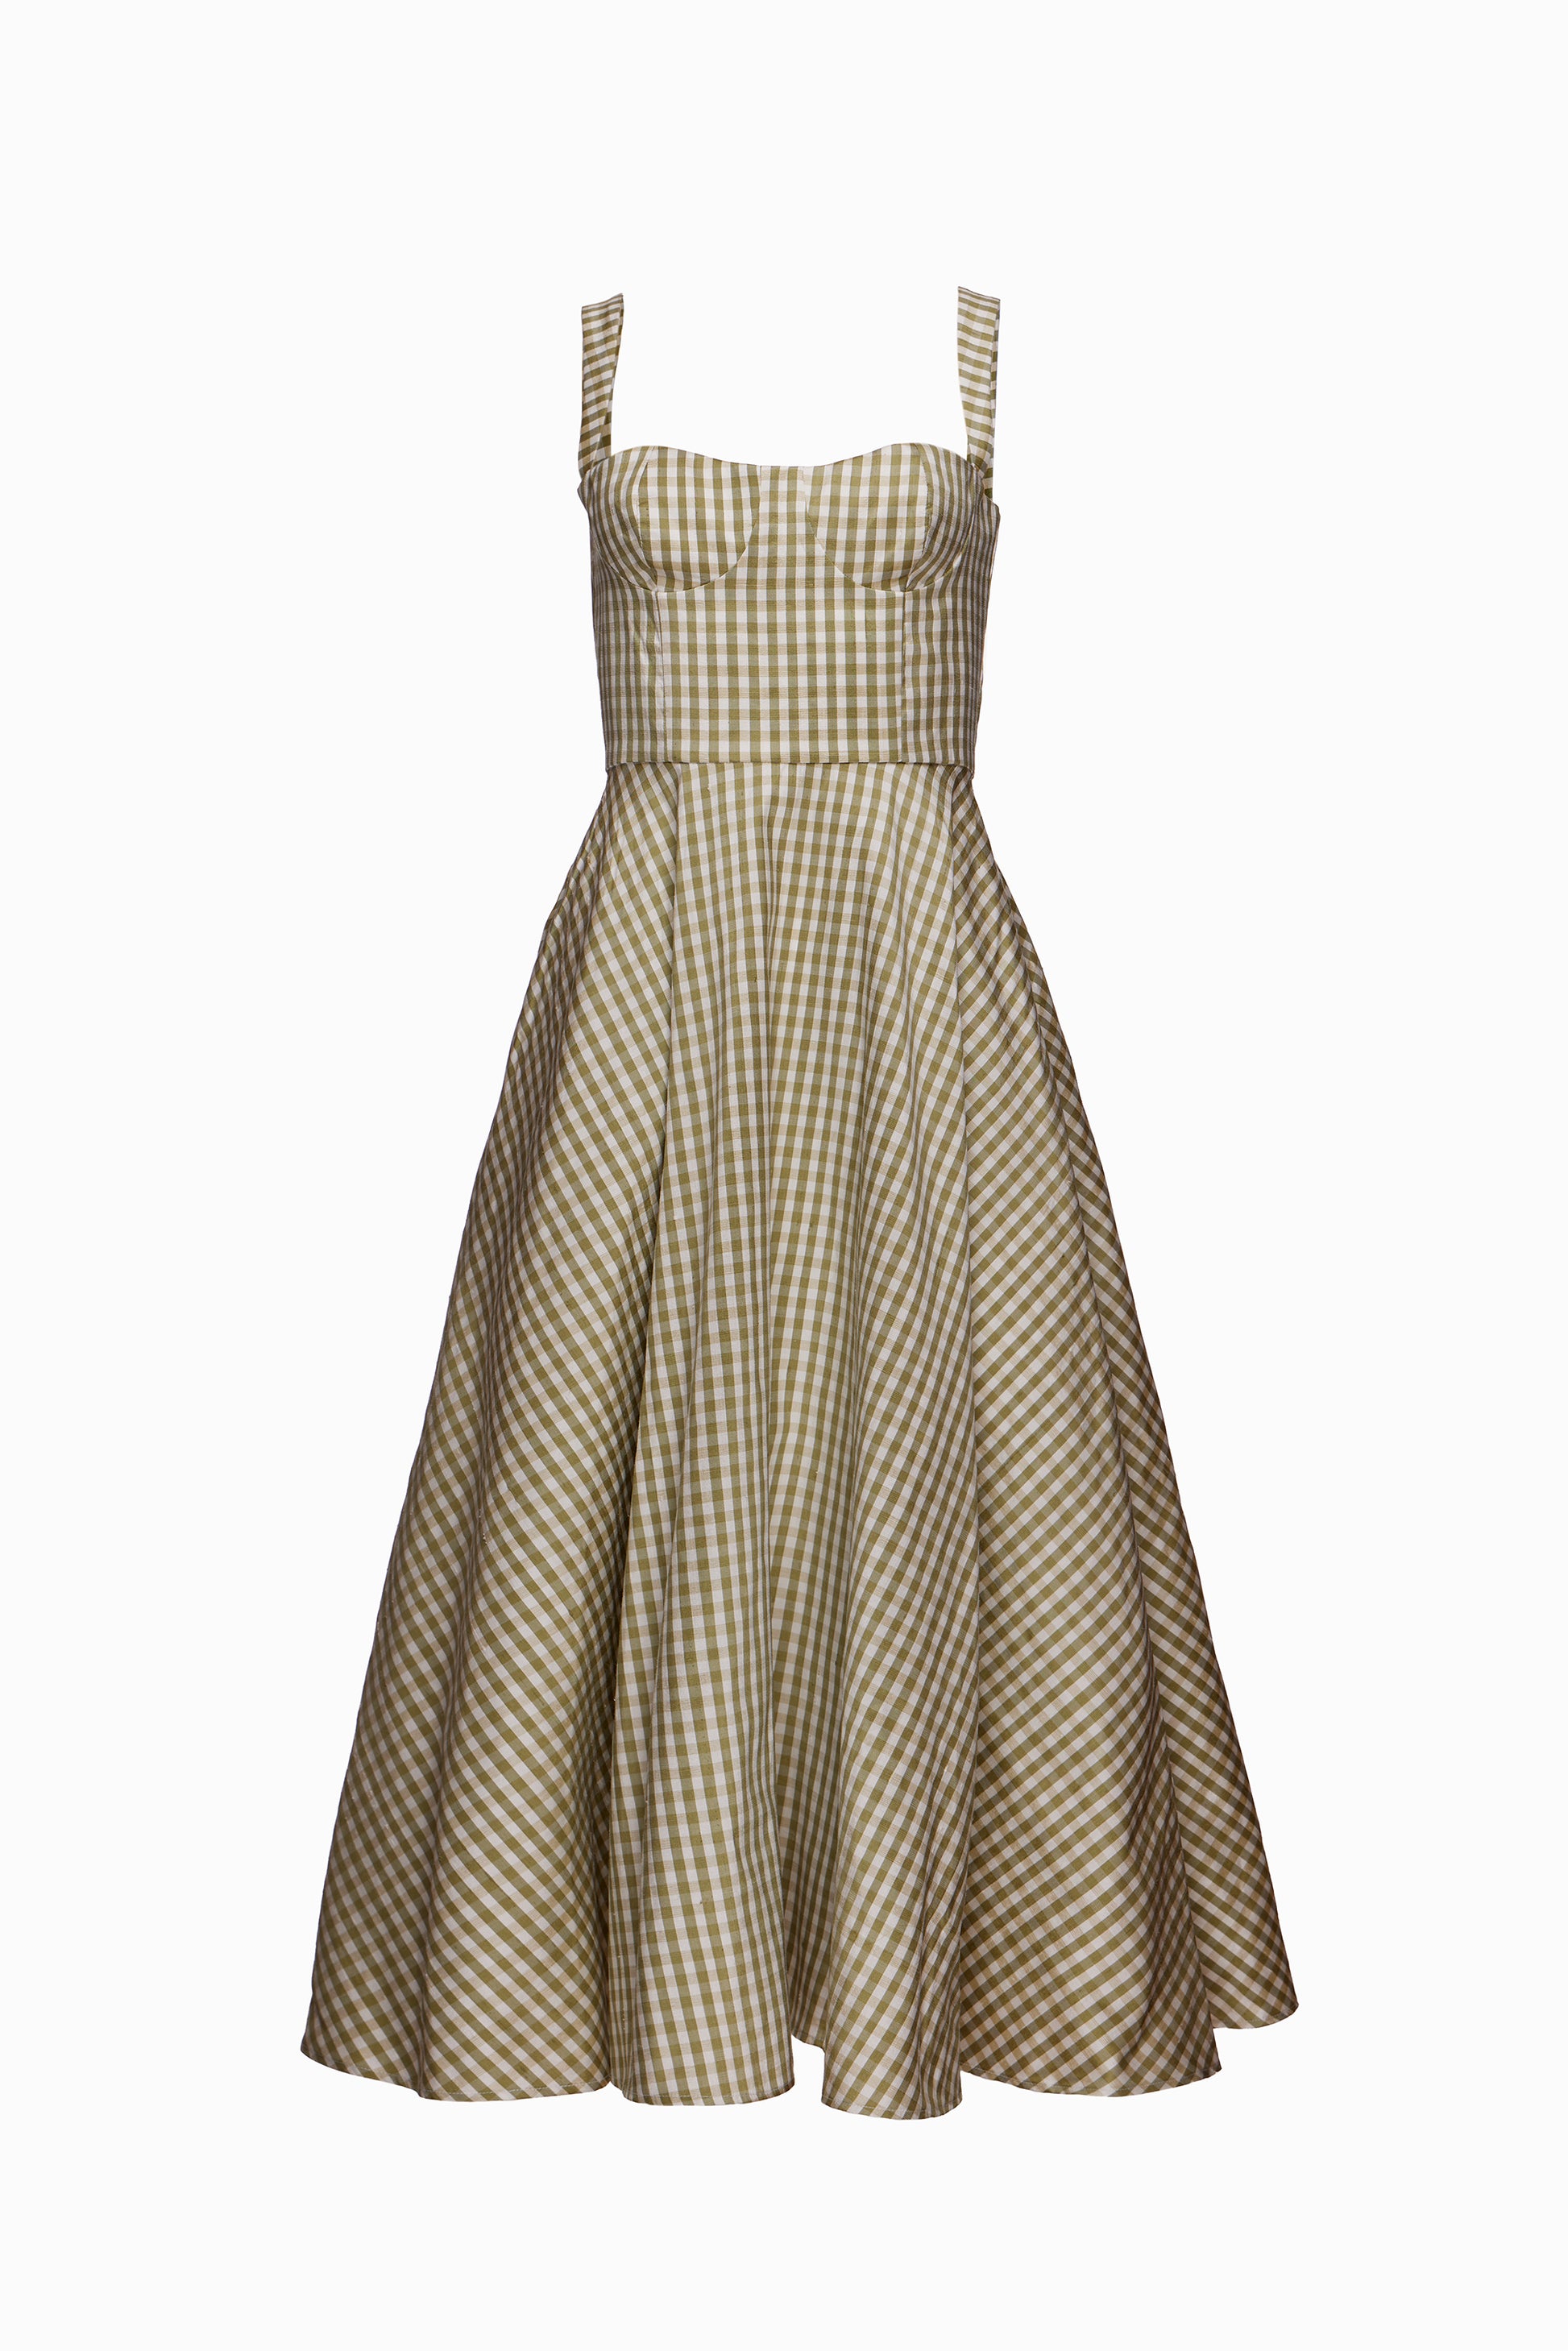 The Gina Dress - Dove Gingham - The Daily Dress